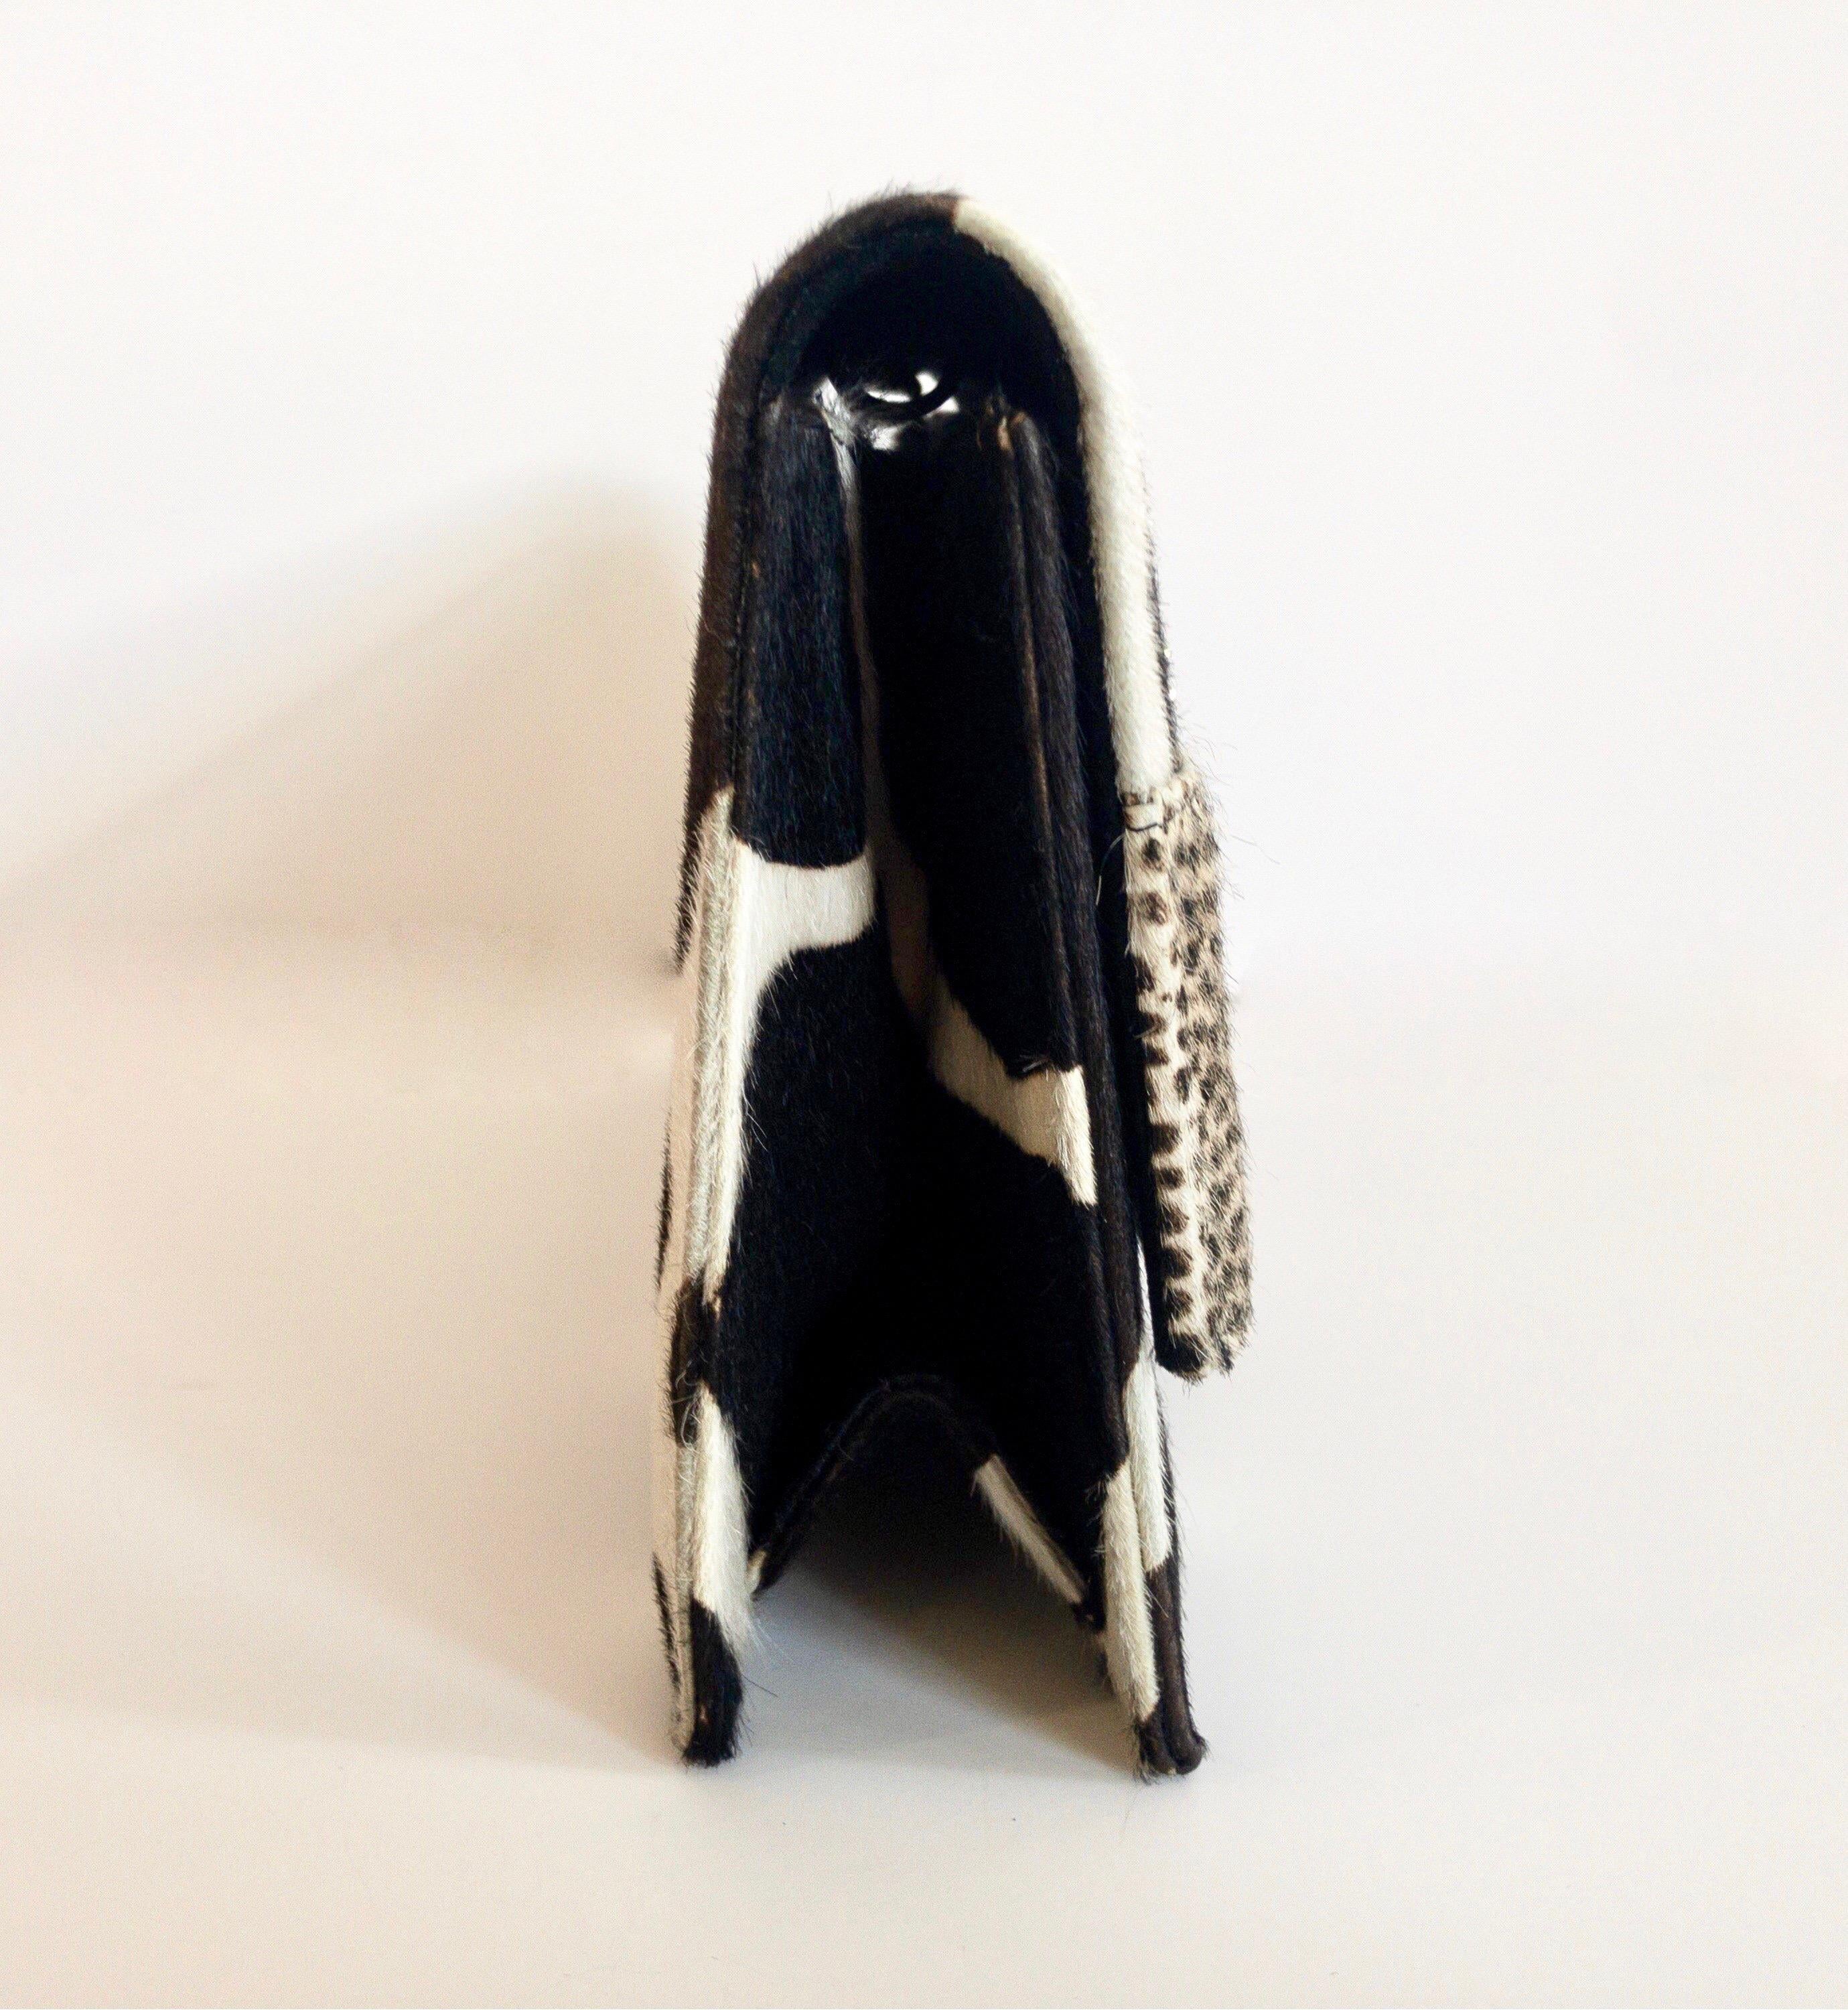 Complete your evening look with this Manolo Blahnik clutch! Circa 2000s, this clutch is made of calf hair and features contrasting cow print and cheetah print. Front exterior of clutch includes a belt style accent with a crystal embellished buckle.